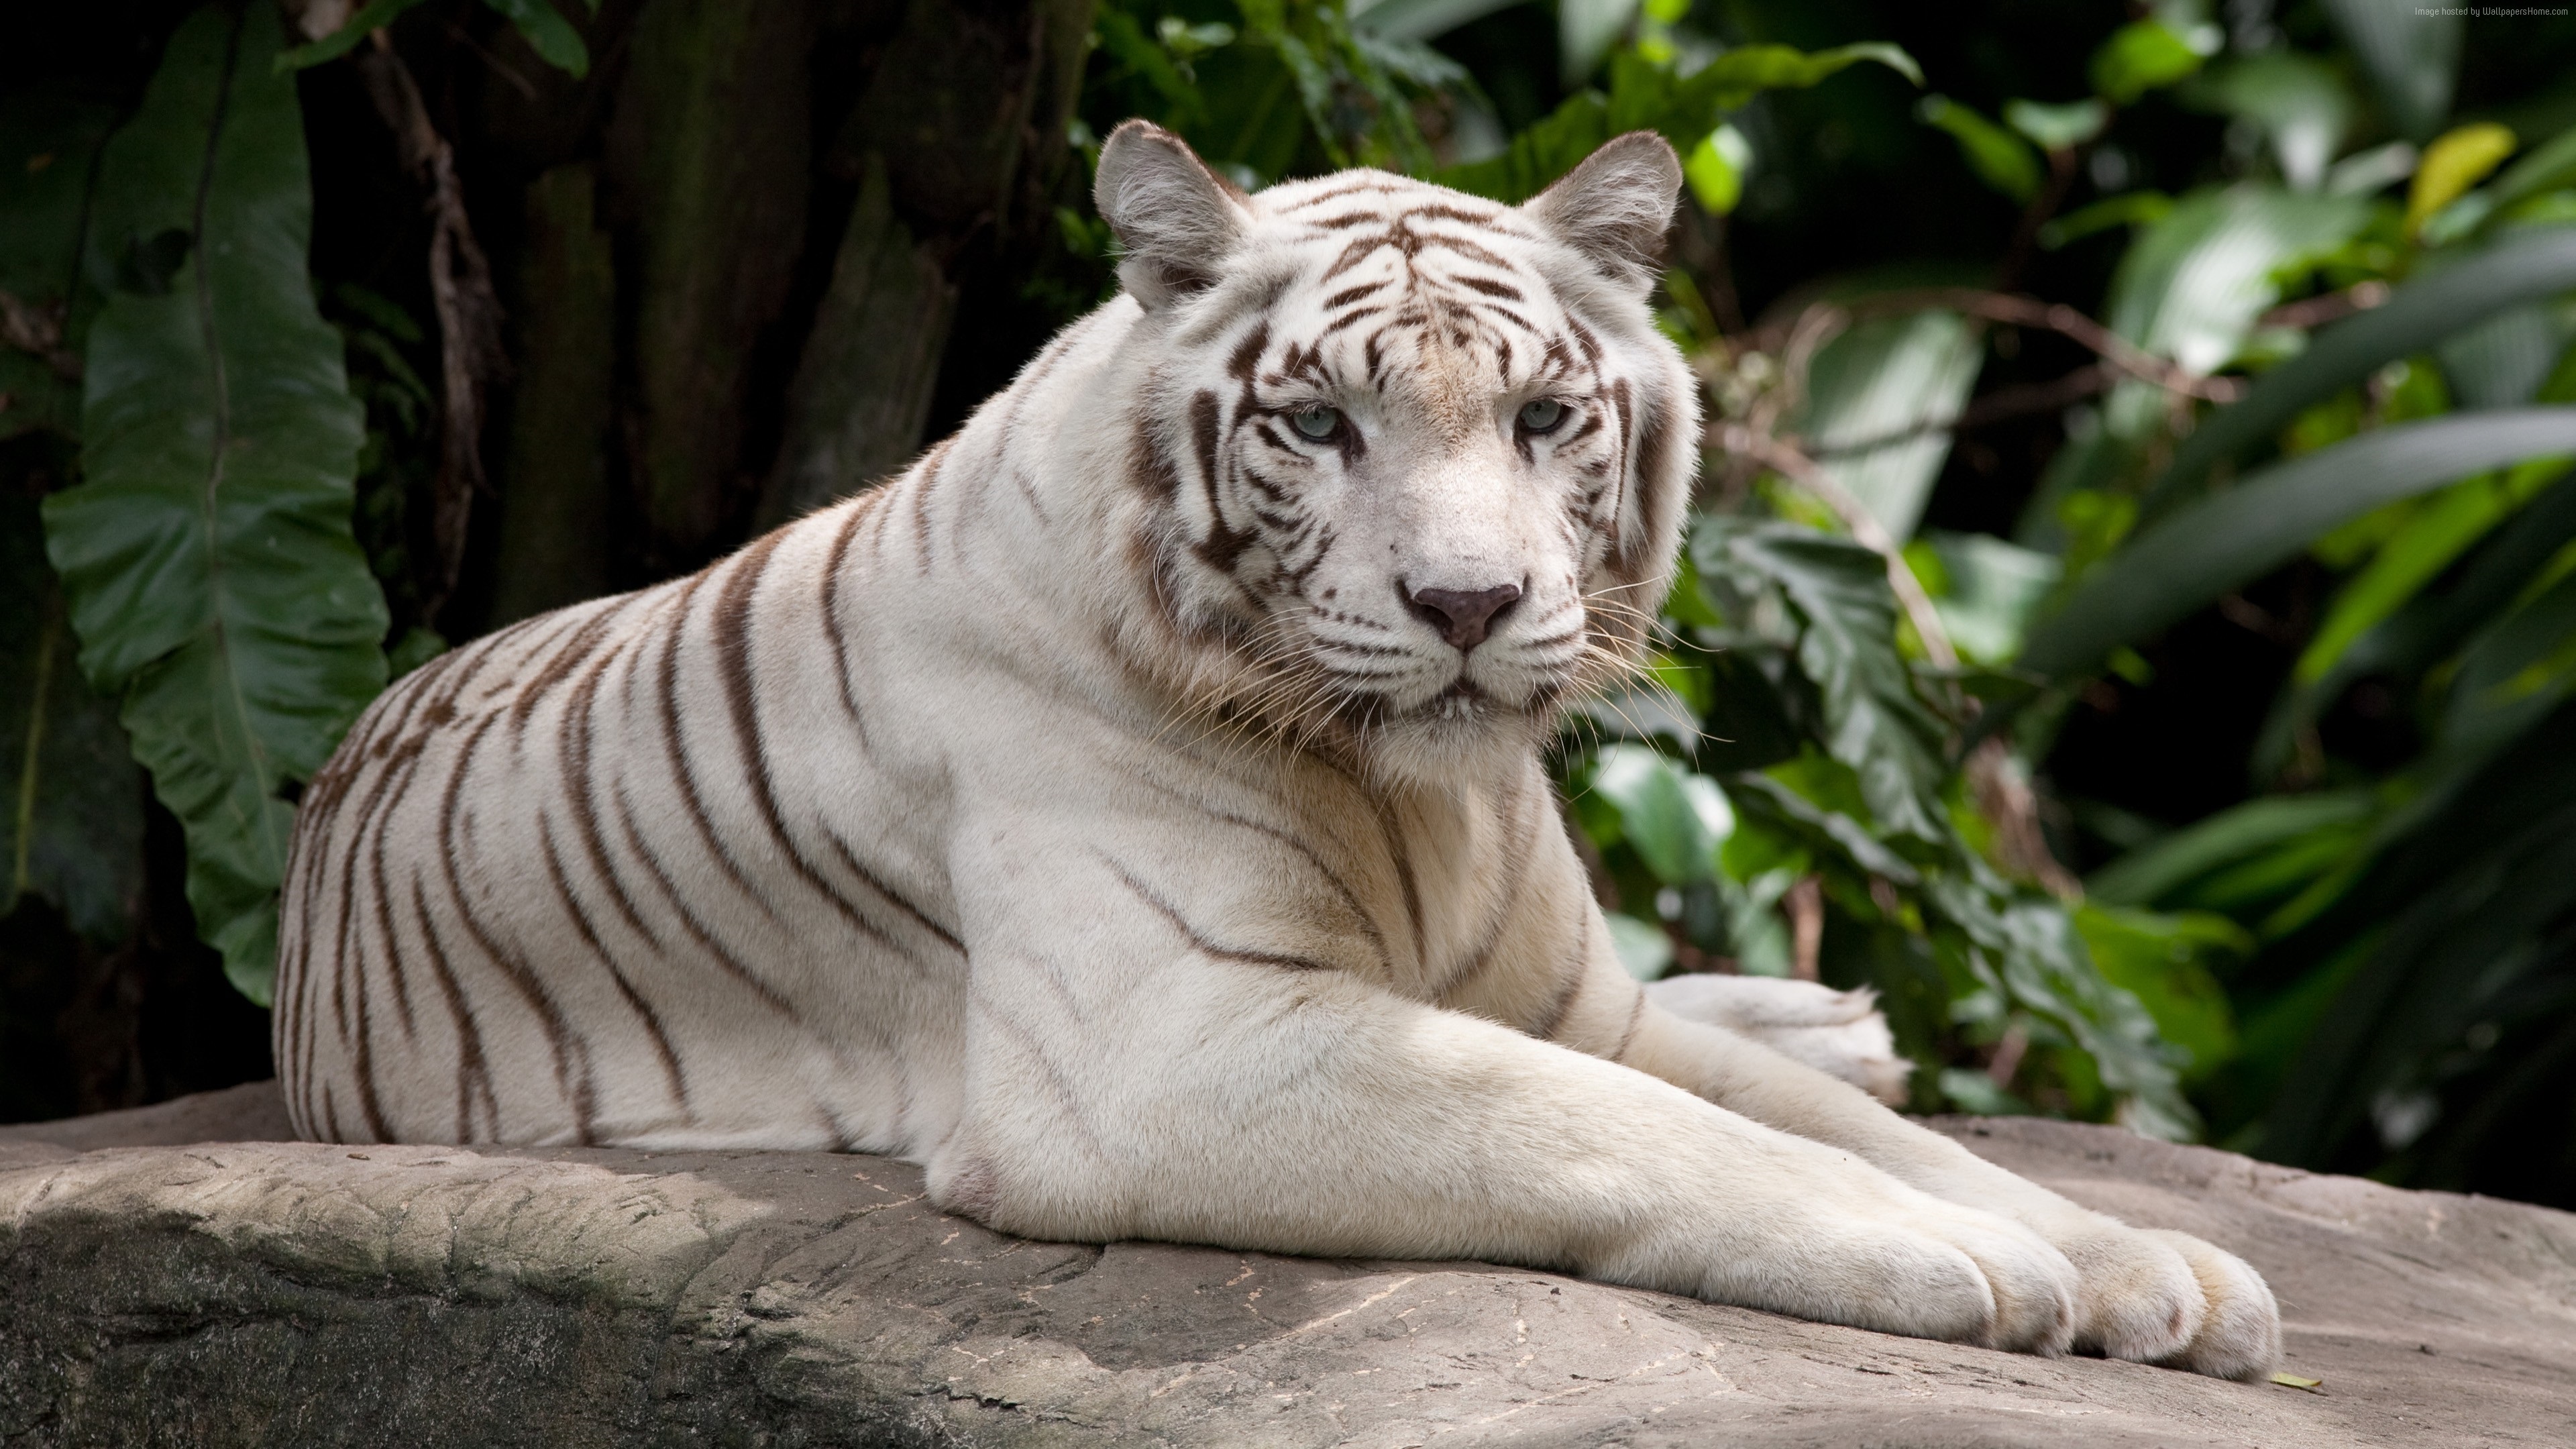 Wallpaper White Tiger Have A Rest - Singapore Zoo - HD Wallpaper 